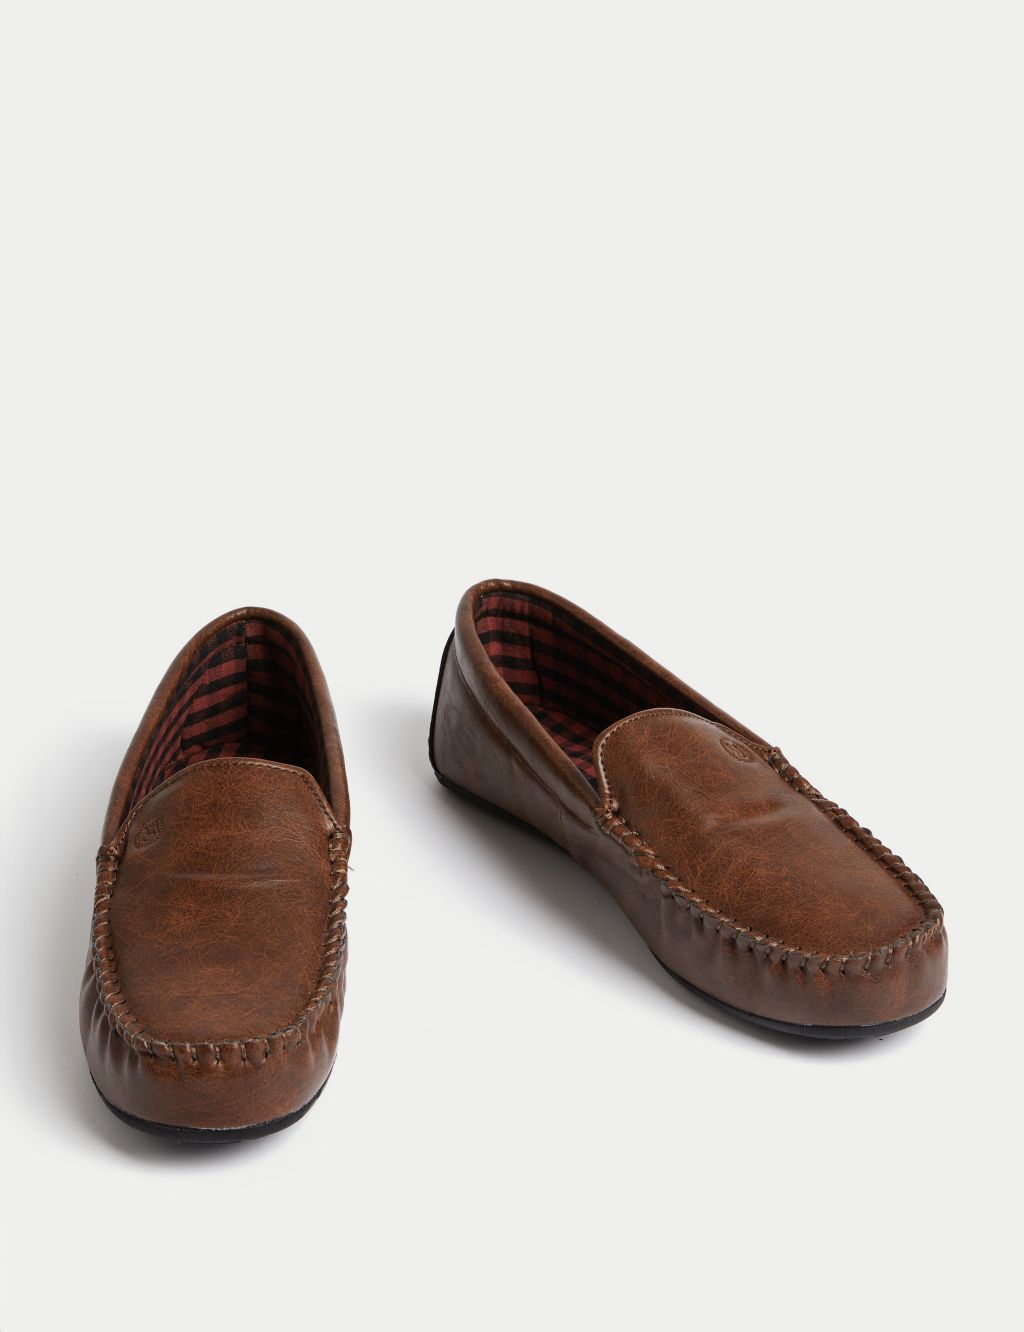 Moccasin Slippers with Freshfeet™ image 2